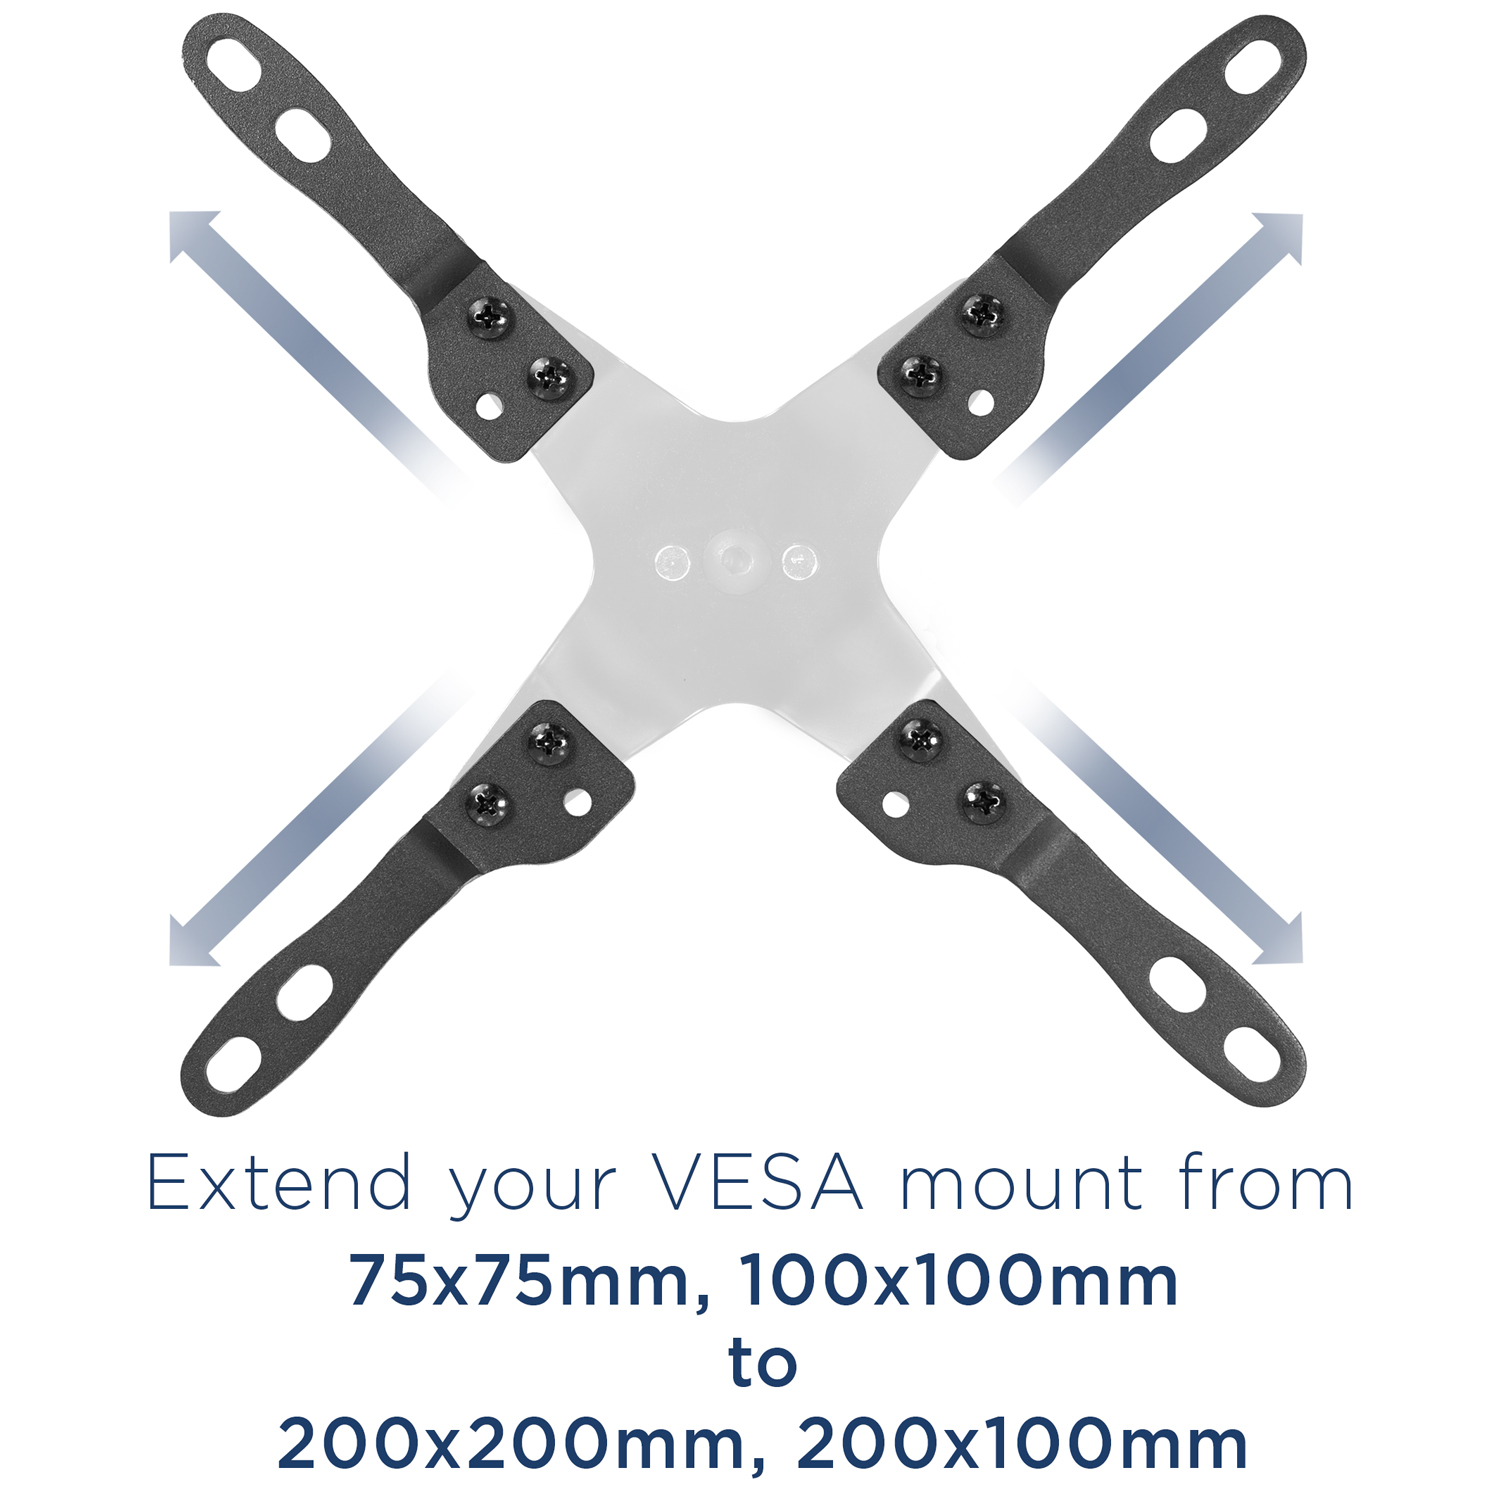 Mount-It! VESA Mount Adapter Kit, TV Wall Mount Bracket Adapter Converts 75x75 and 100x100 mm Patterns to 200x100 and 200x200 mm, Fits Most 23 inch to 42 inch TV's and Monitors, Hardware Included - image 3 of 8